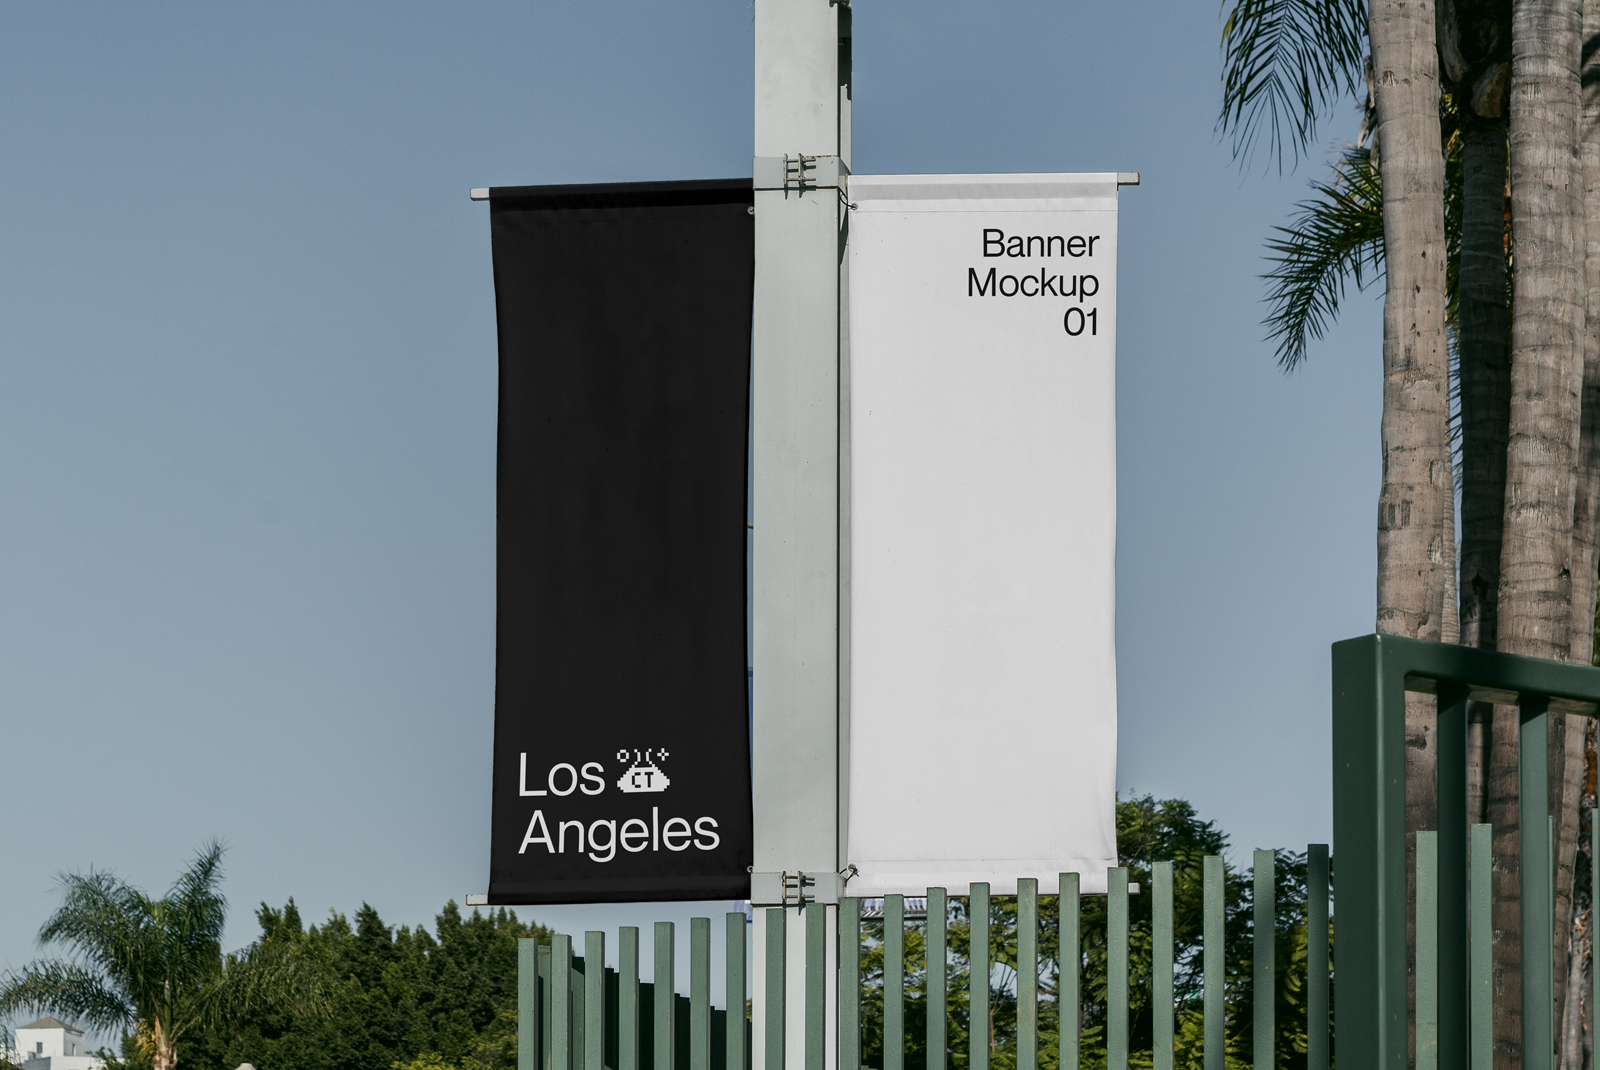 Vertical banner mockup on a pole, outdoor advertising, clear sky, text space, realistic design presentation, Los Angeles.